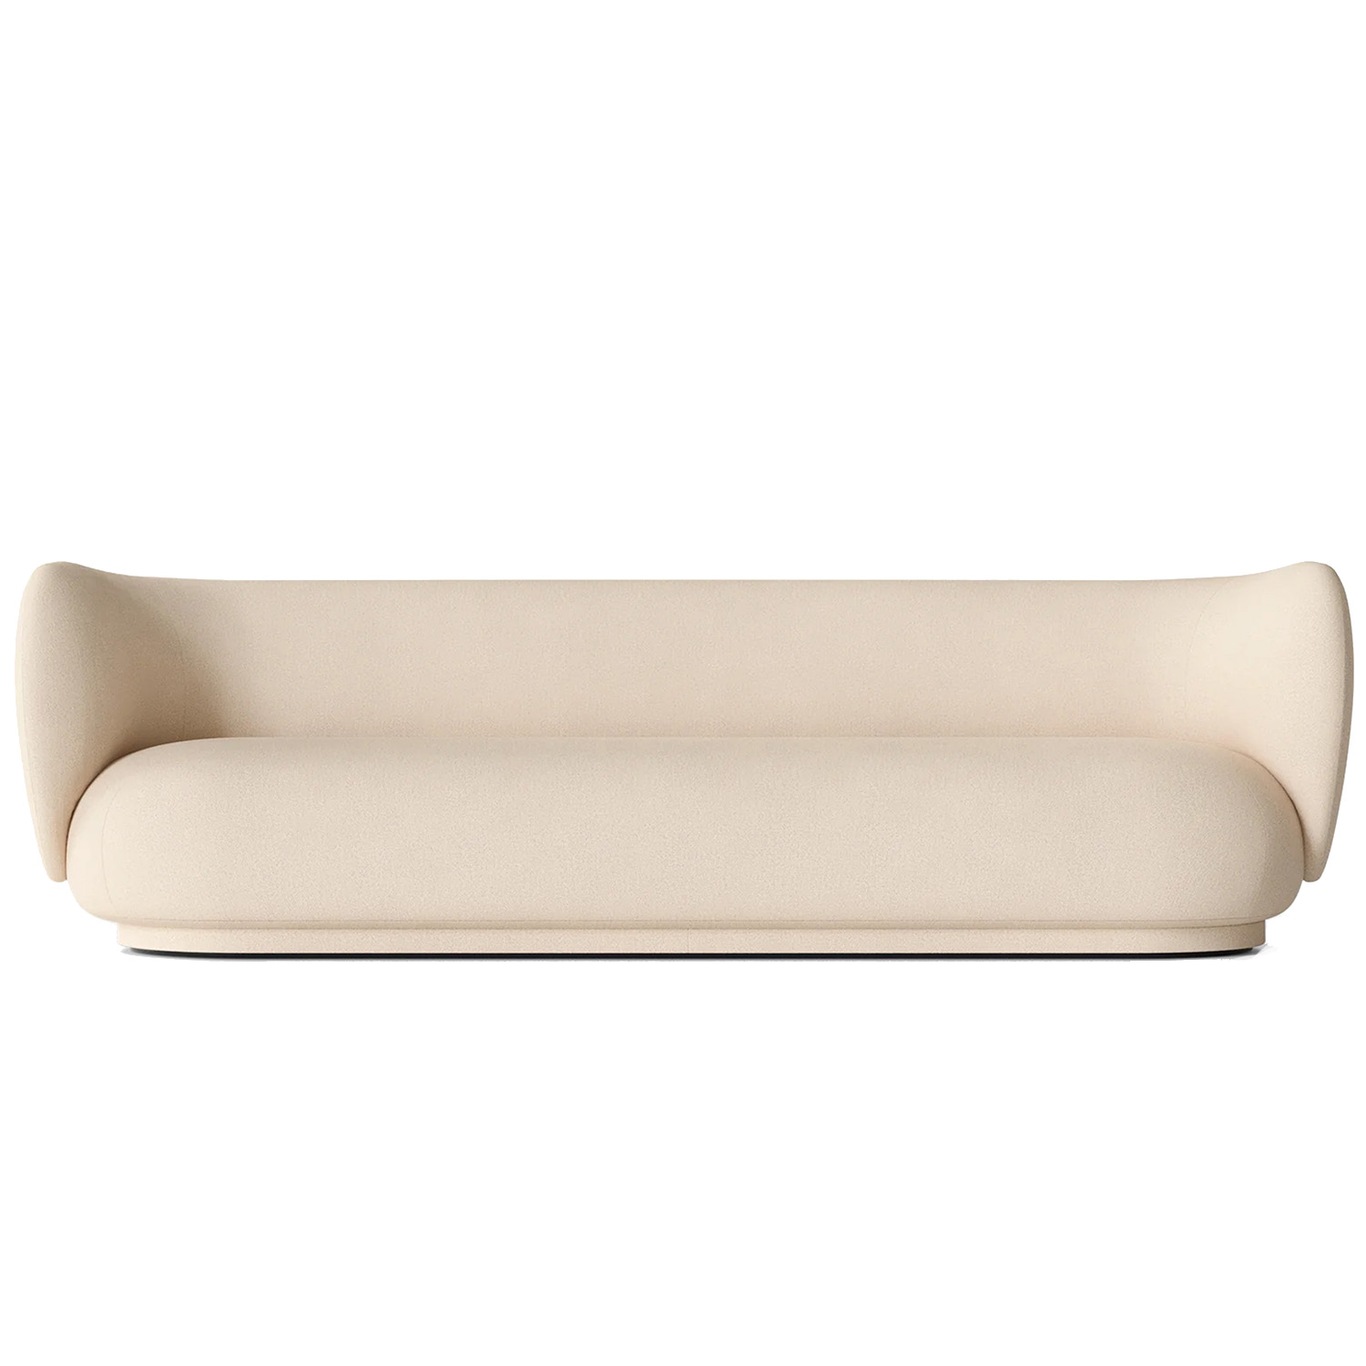 Rico Brushed 4-Personers Sofa, Offwhite